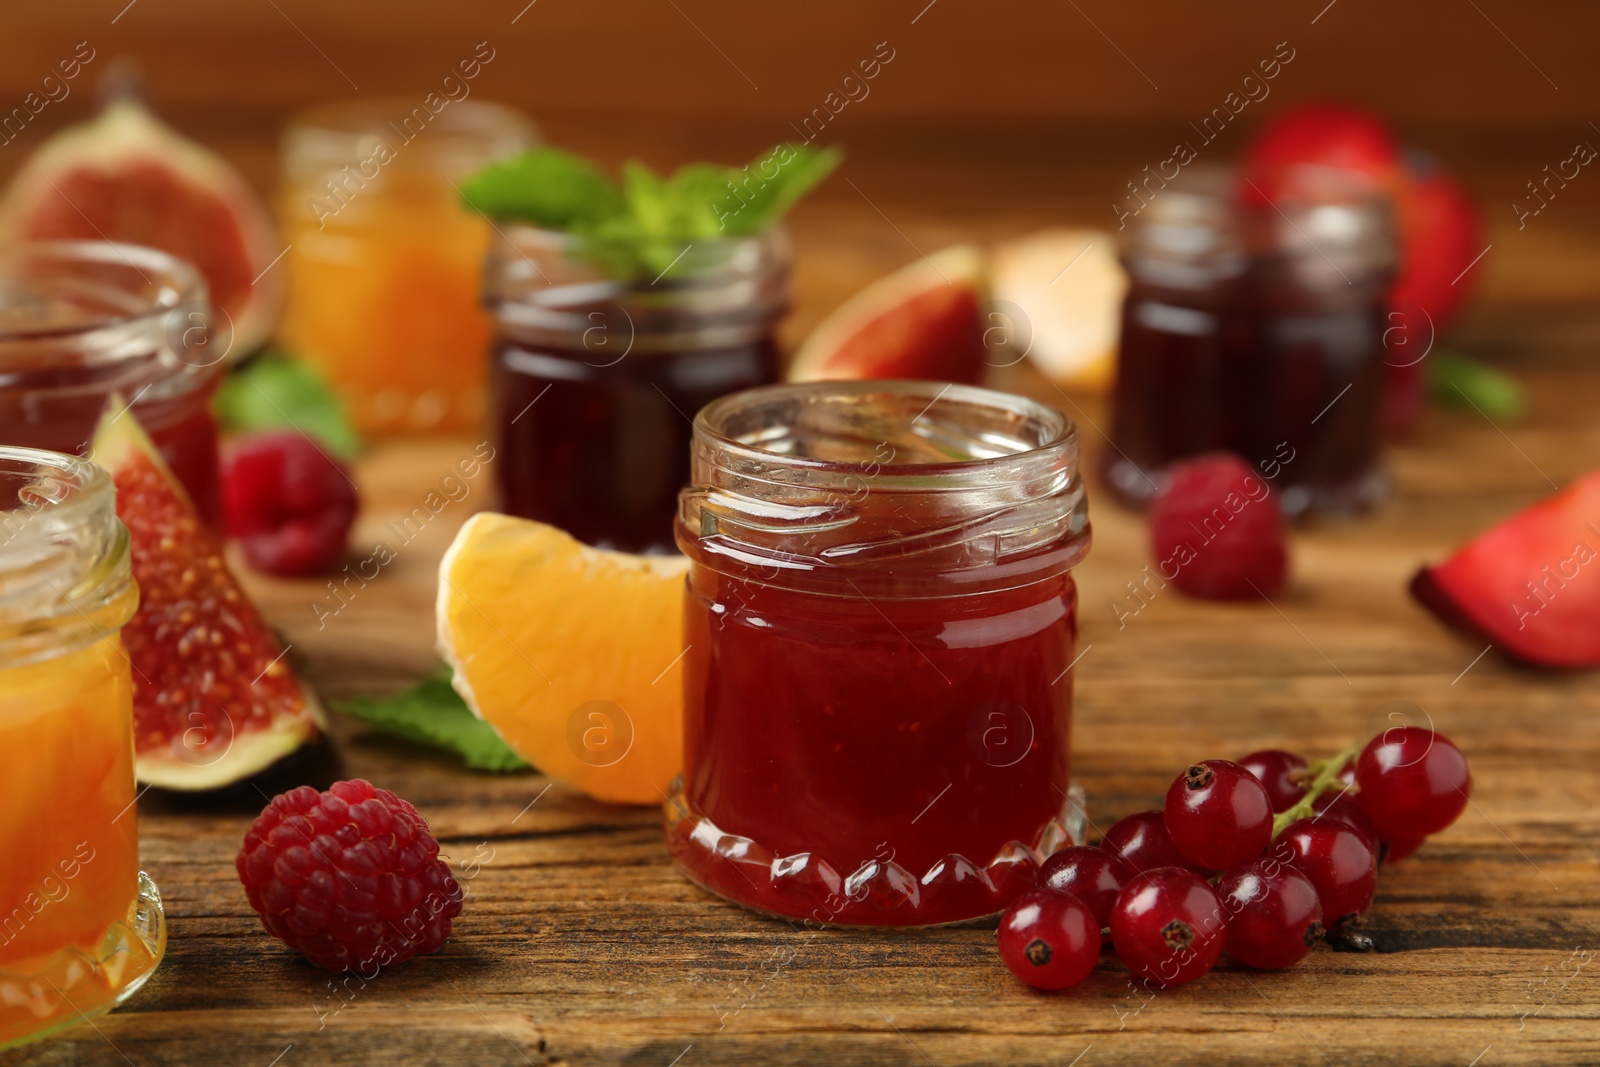 Photo of Jars of different jams and fresh ingredients on wooden table